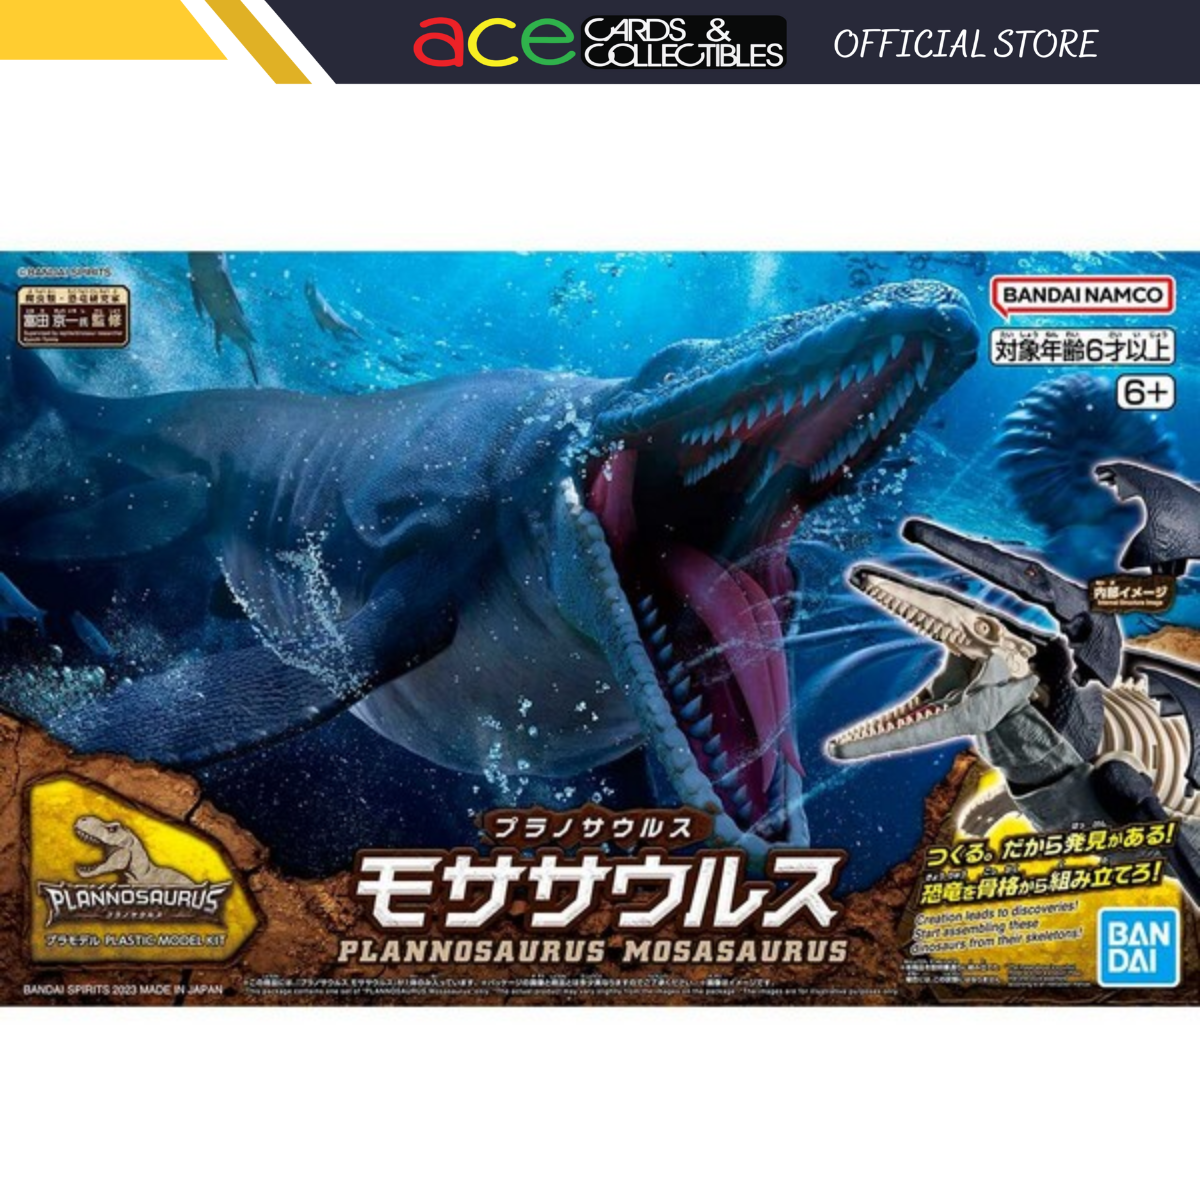 Products Tagged "New Dinosaur" - Ace Cards & Collectibles